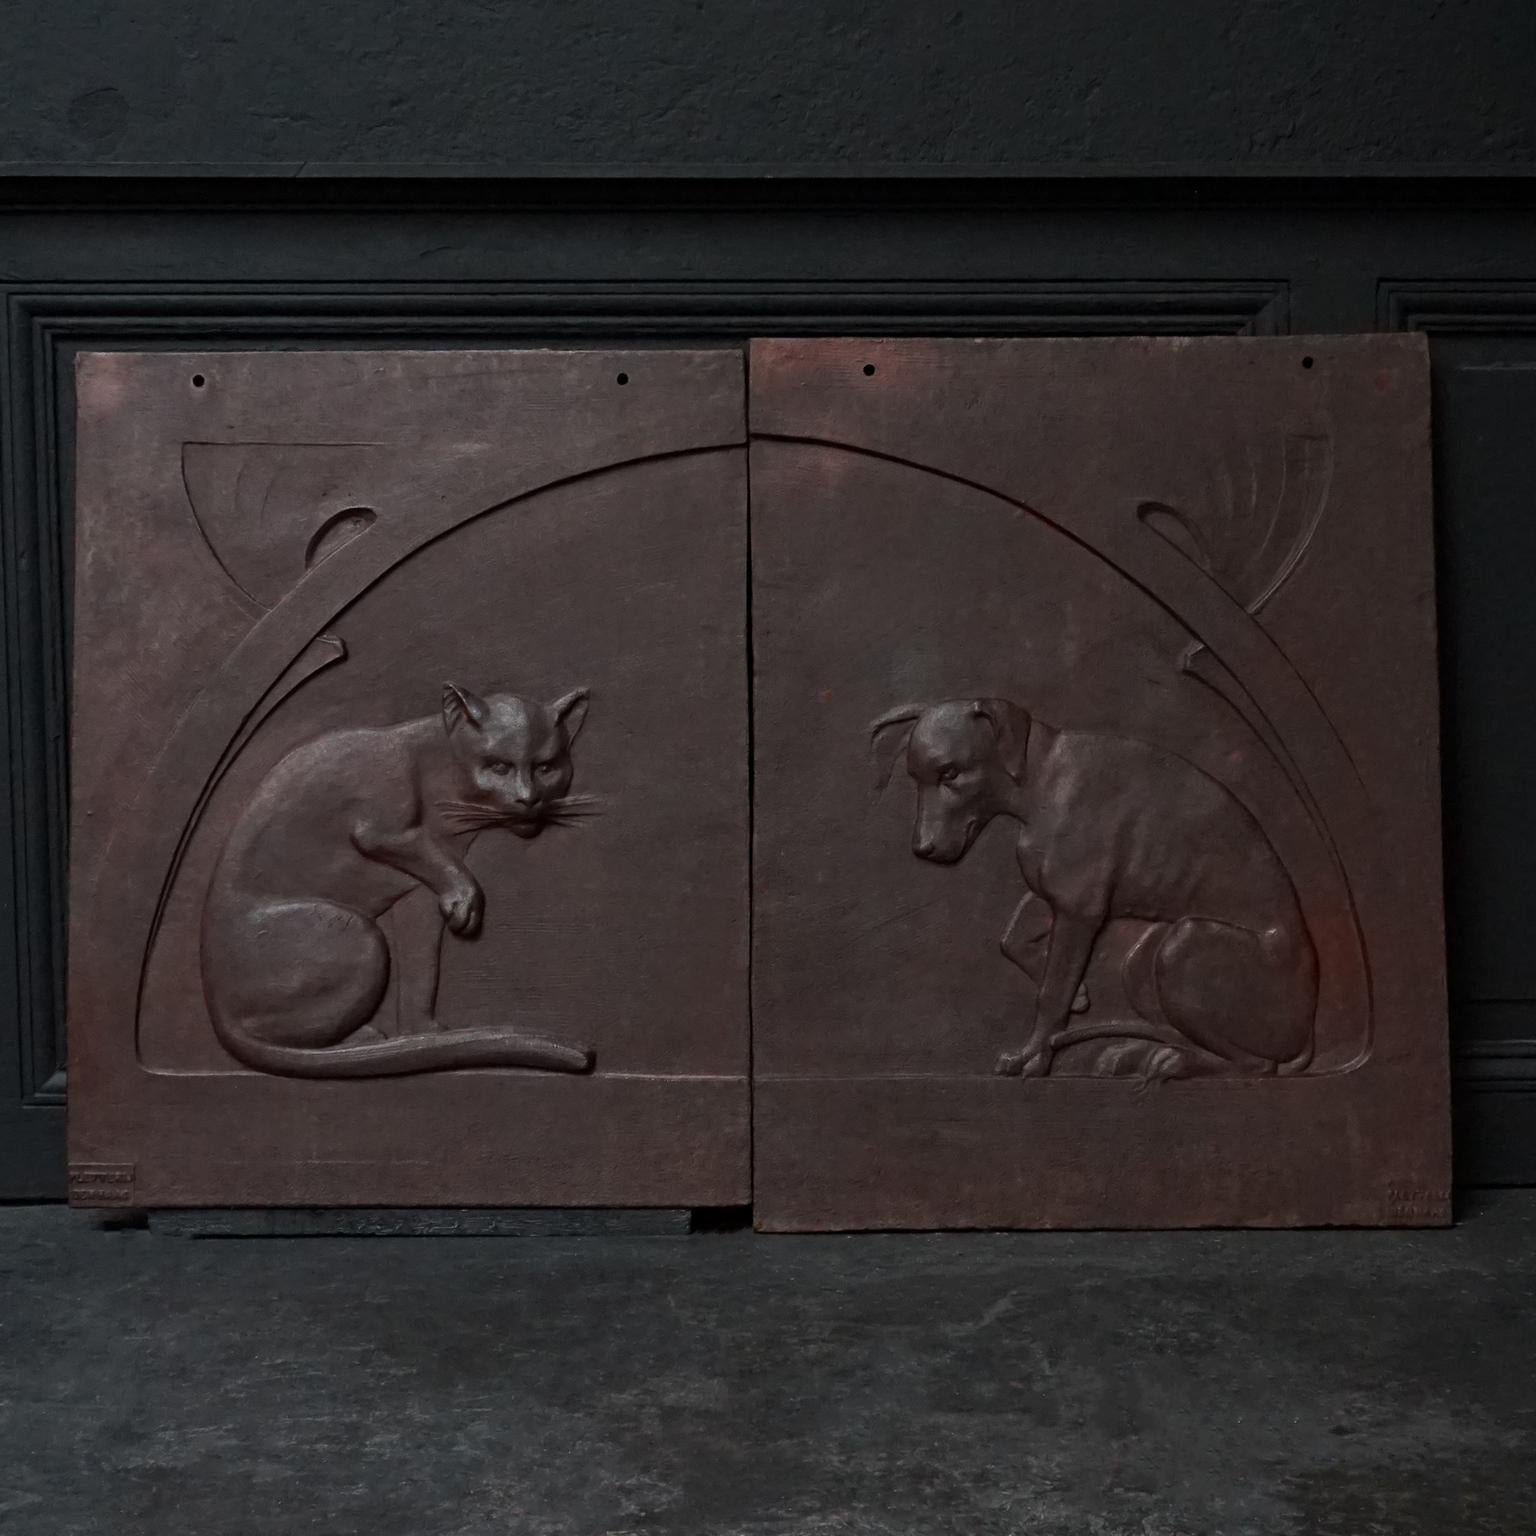 Wonderful large and heavy set of relief cast iron plaques from the Jugendstil era, made by 'Pletterij Den Haag' (ironworks The Hague)
Could be used as decorative wall panels, backsplash or firebacks but were most likely originally made as facade